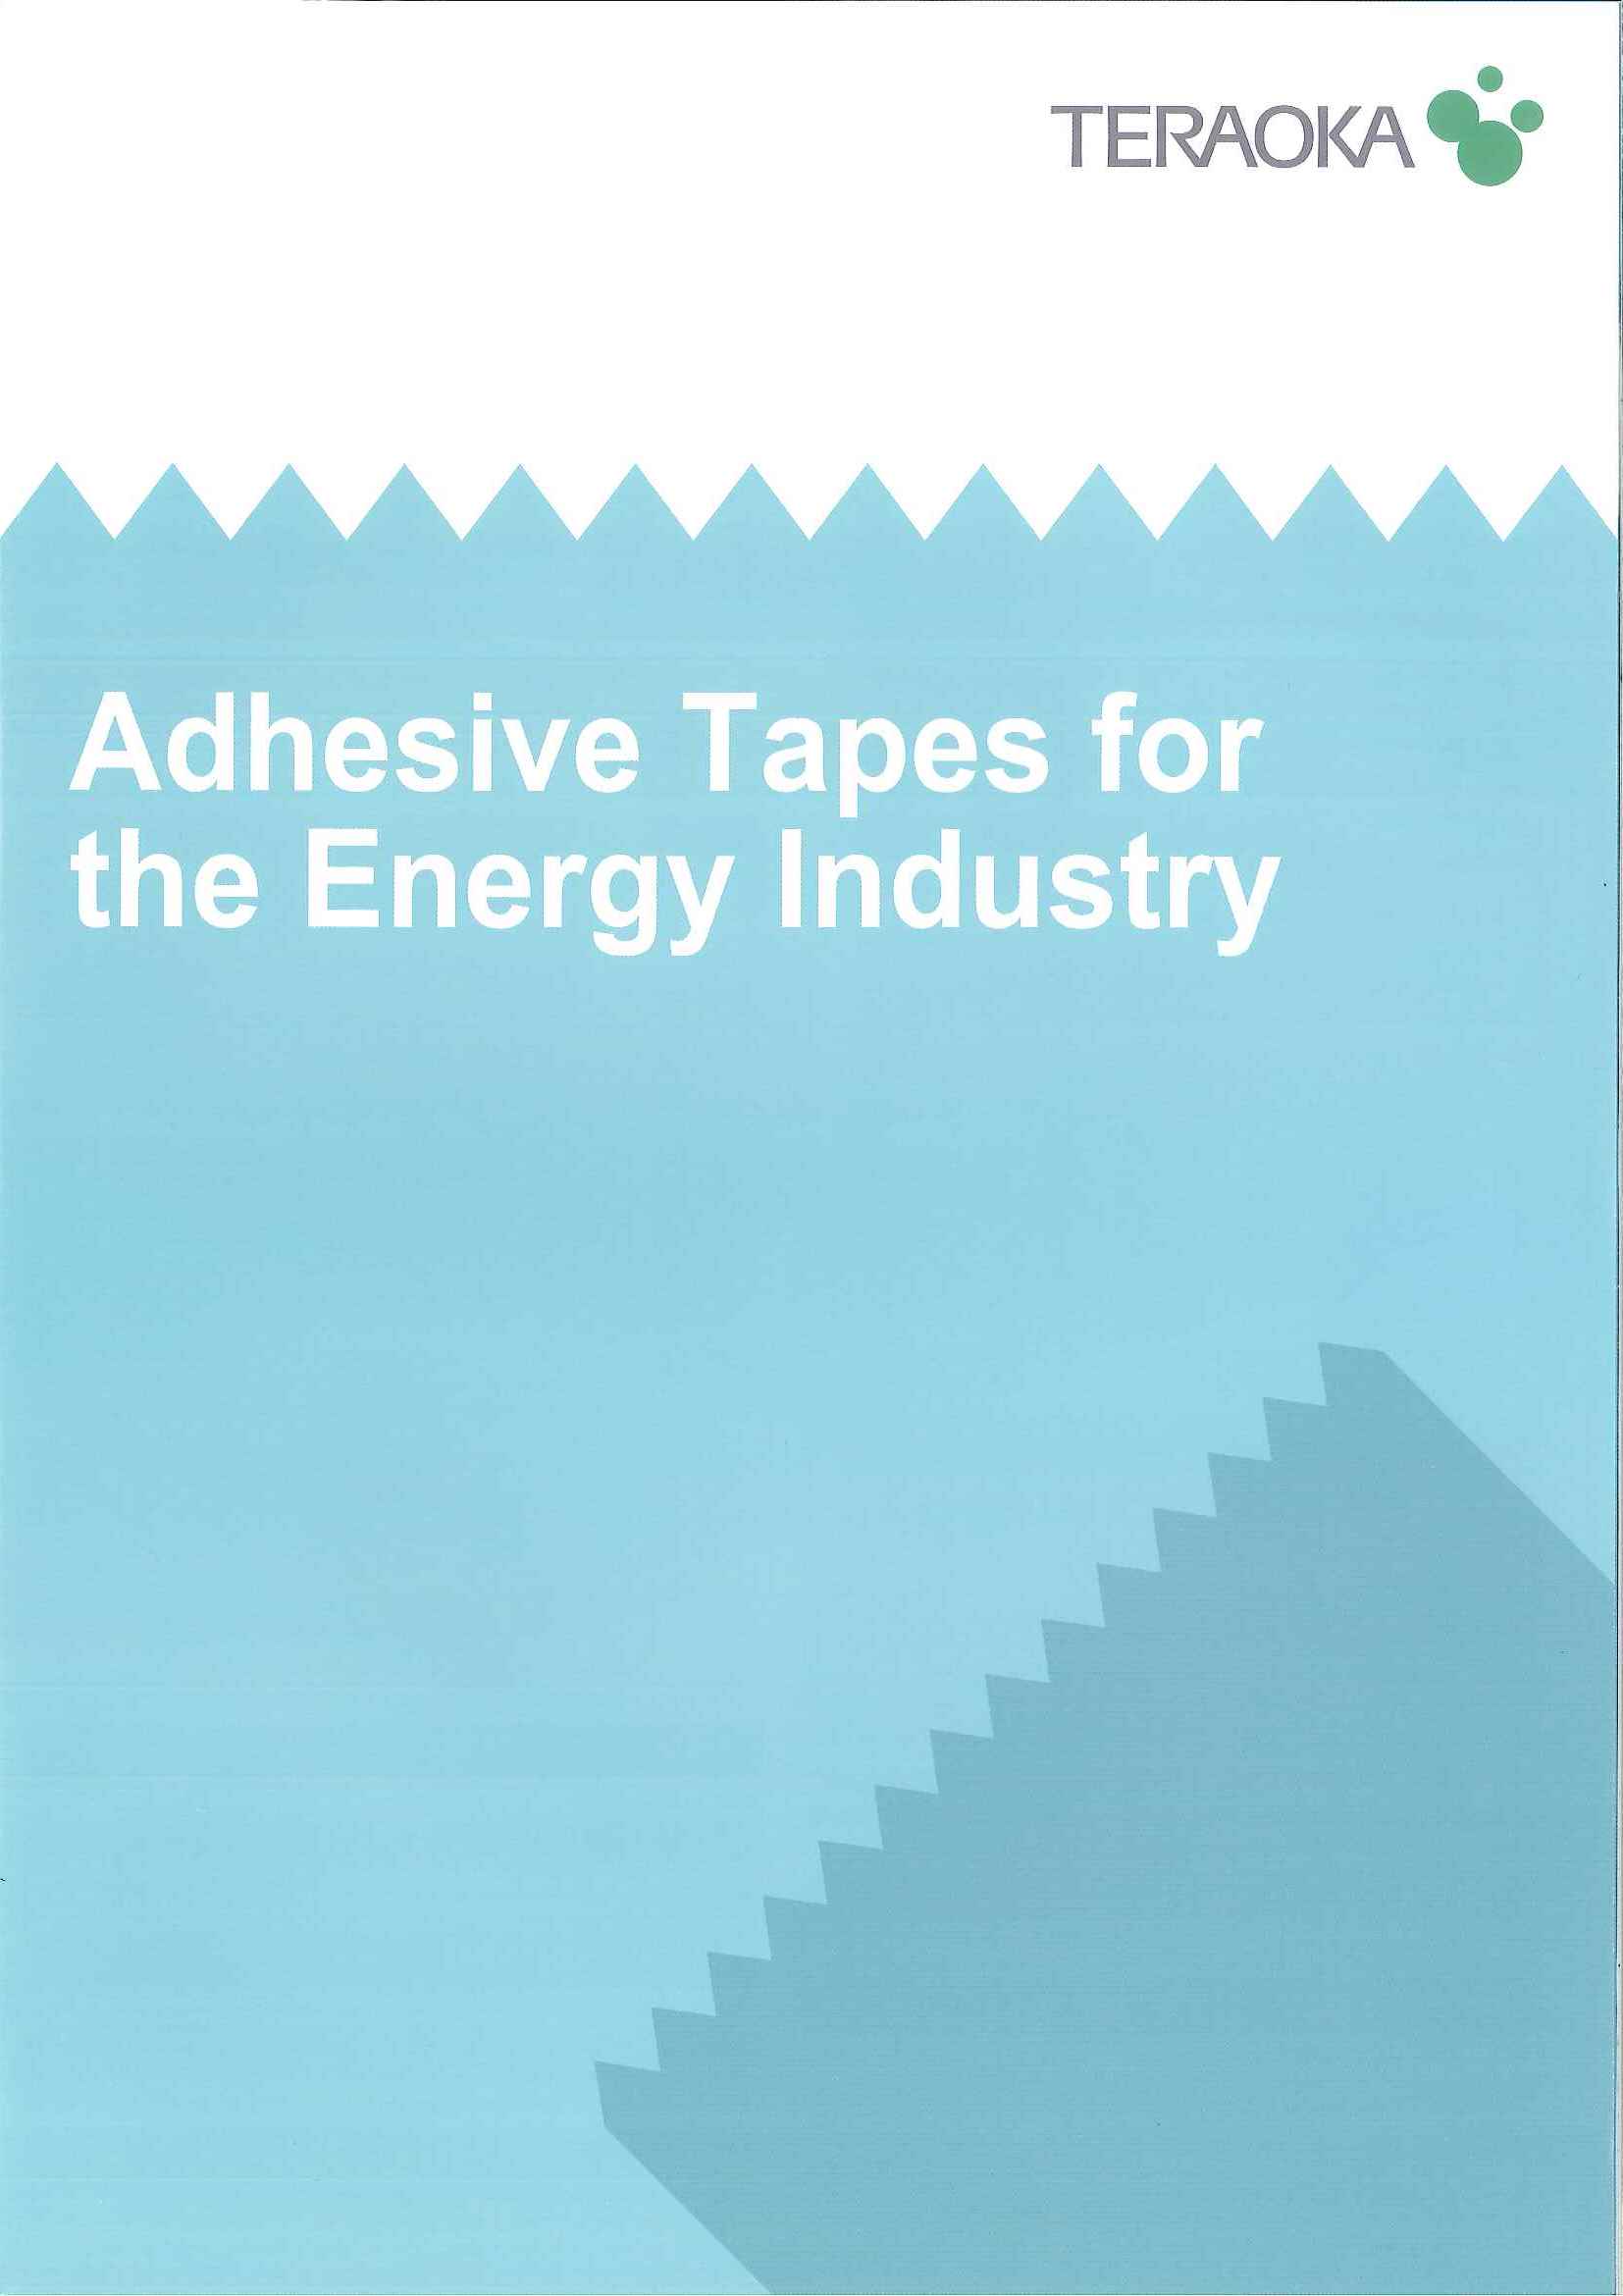 Adhesive Tapes for the Energy Industry